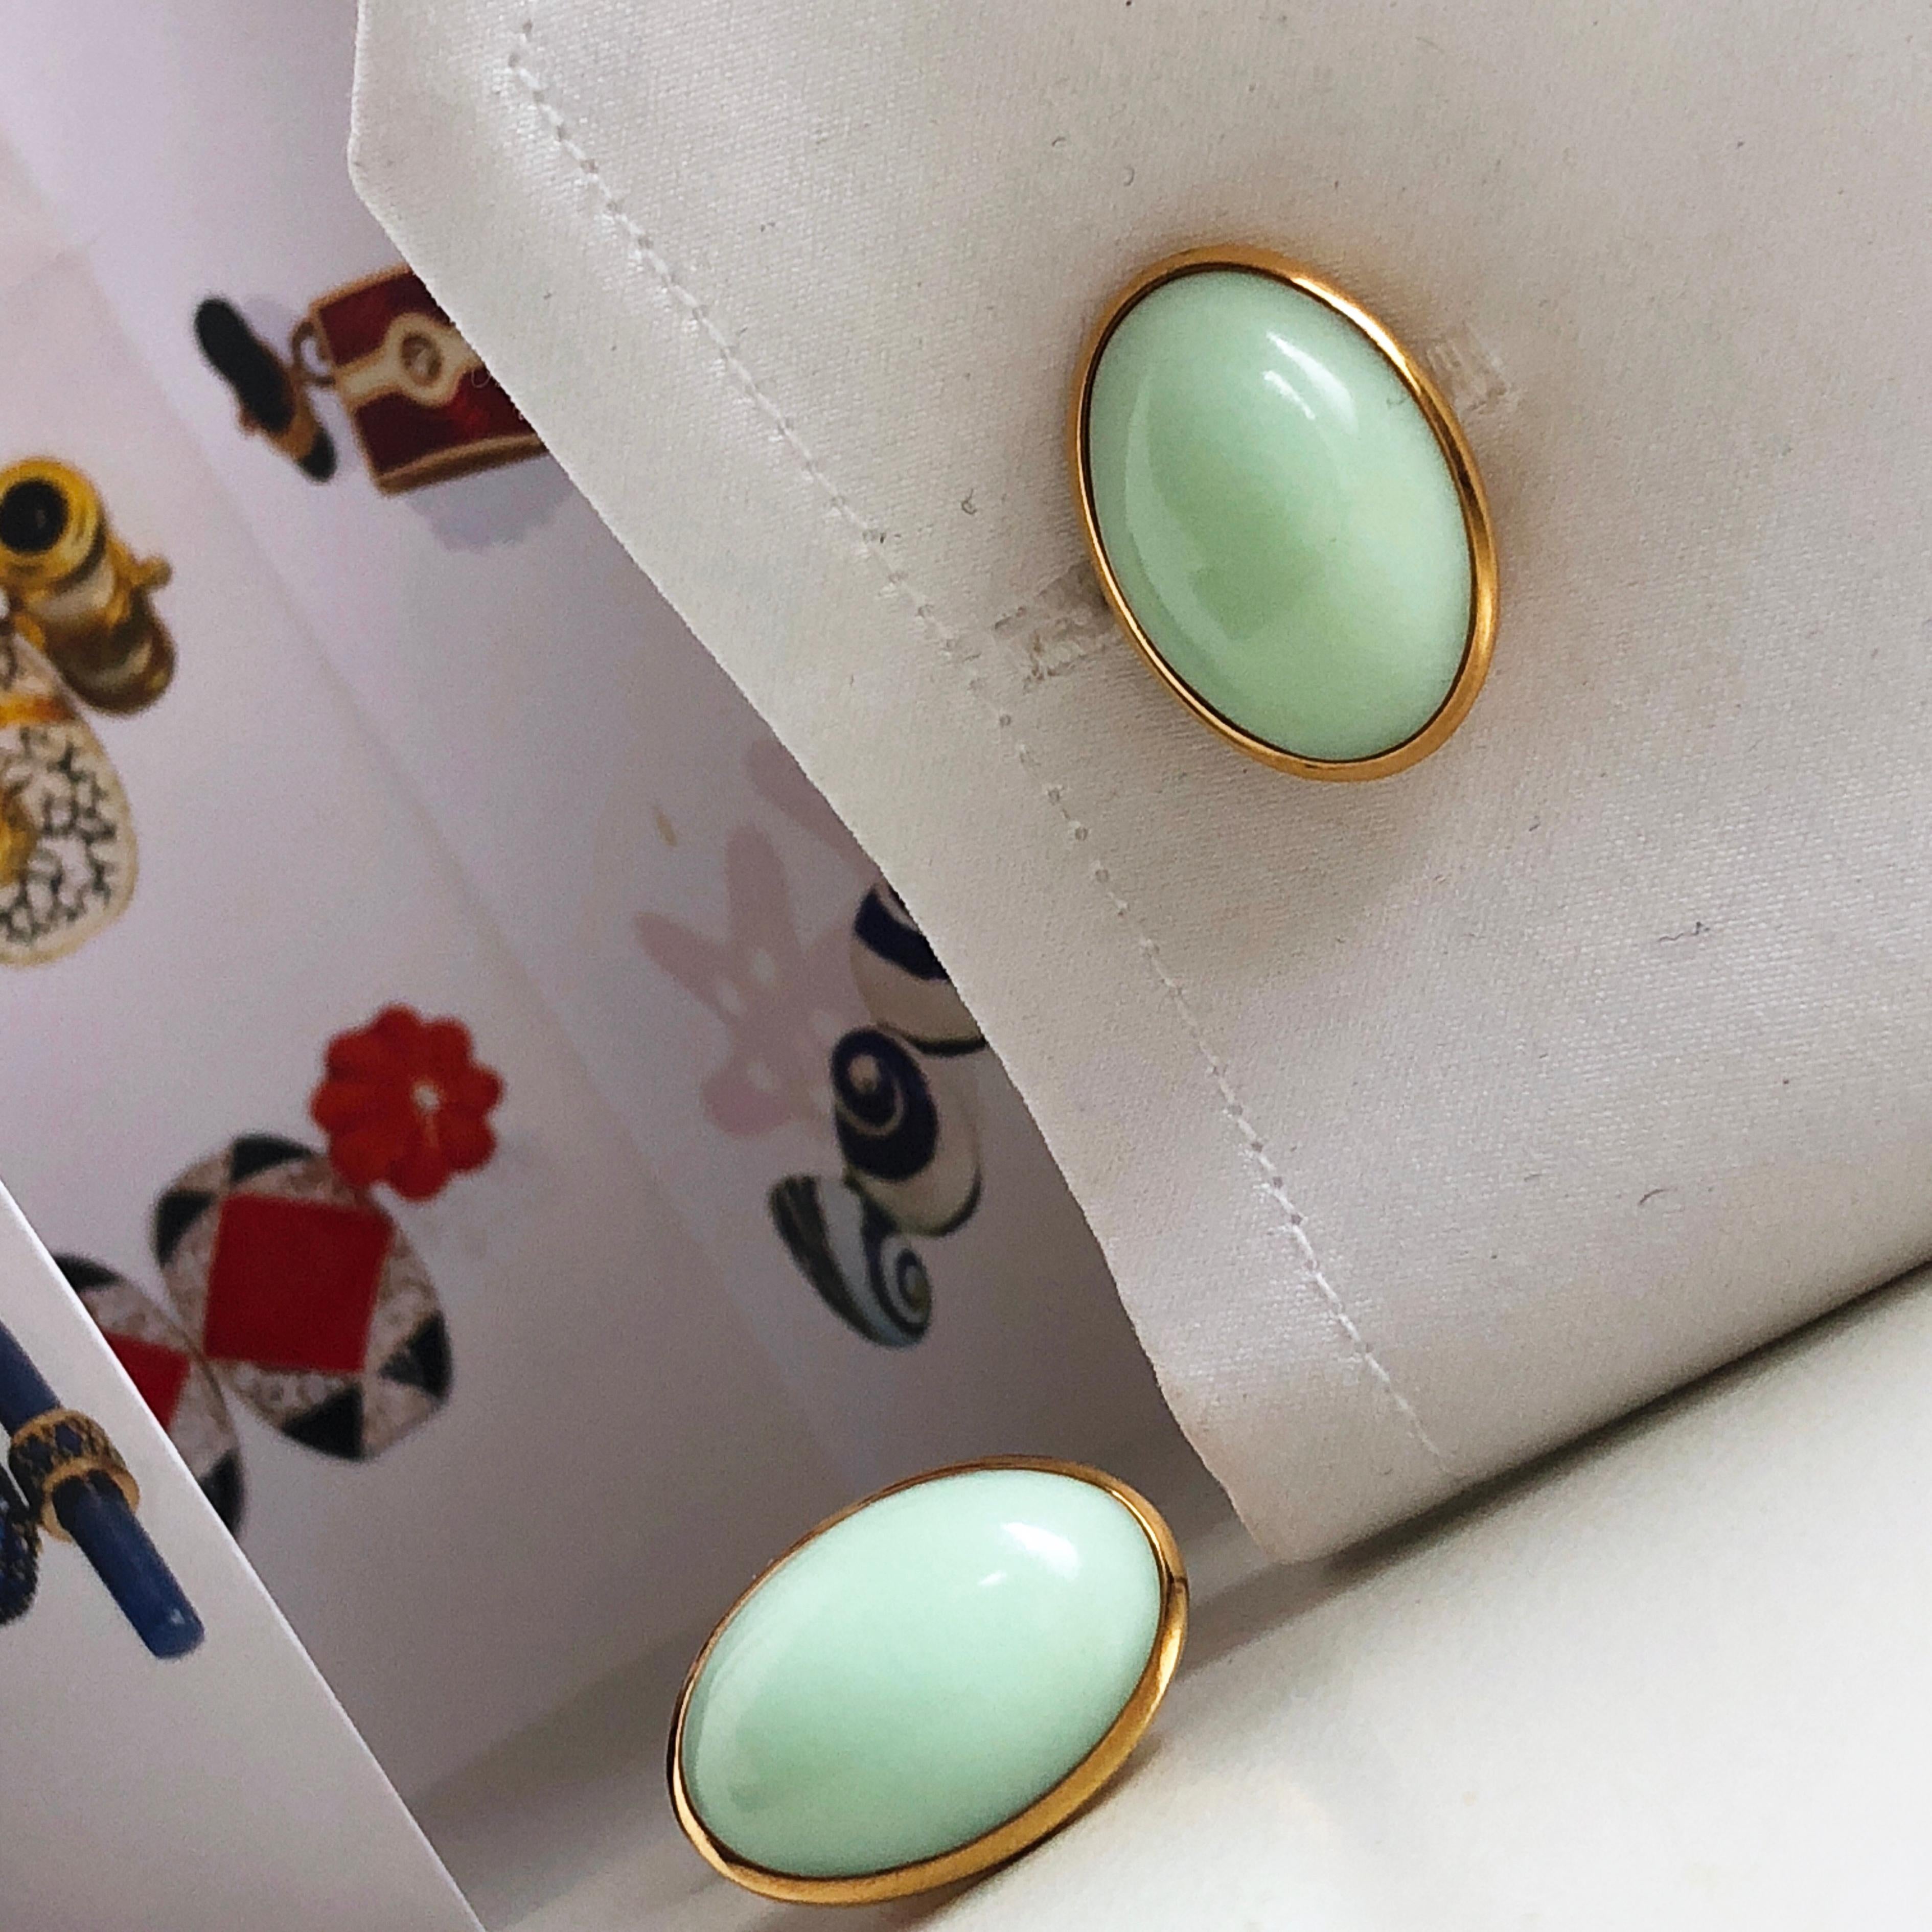 Oval Cut Berca Natural Green Opal Cabochon Sterling Silver Gold-Plated Cufflinks